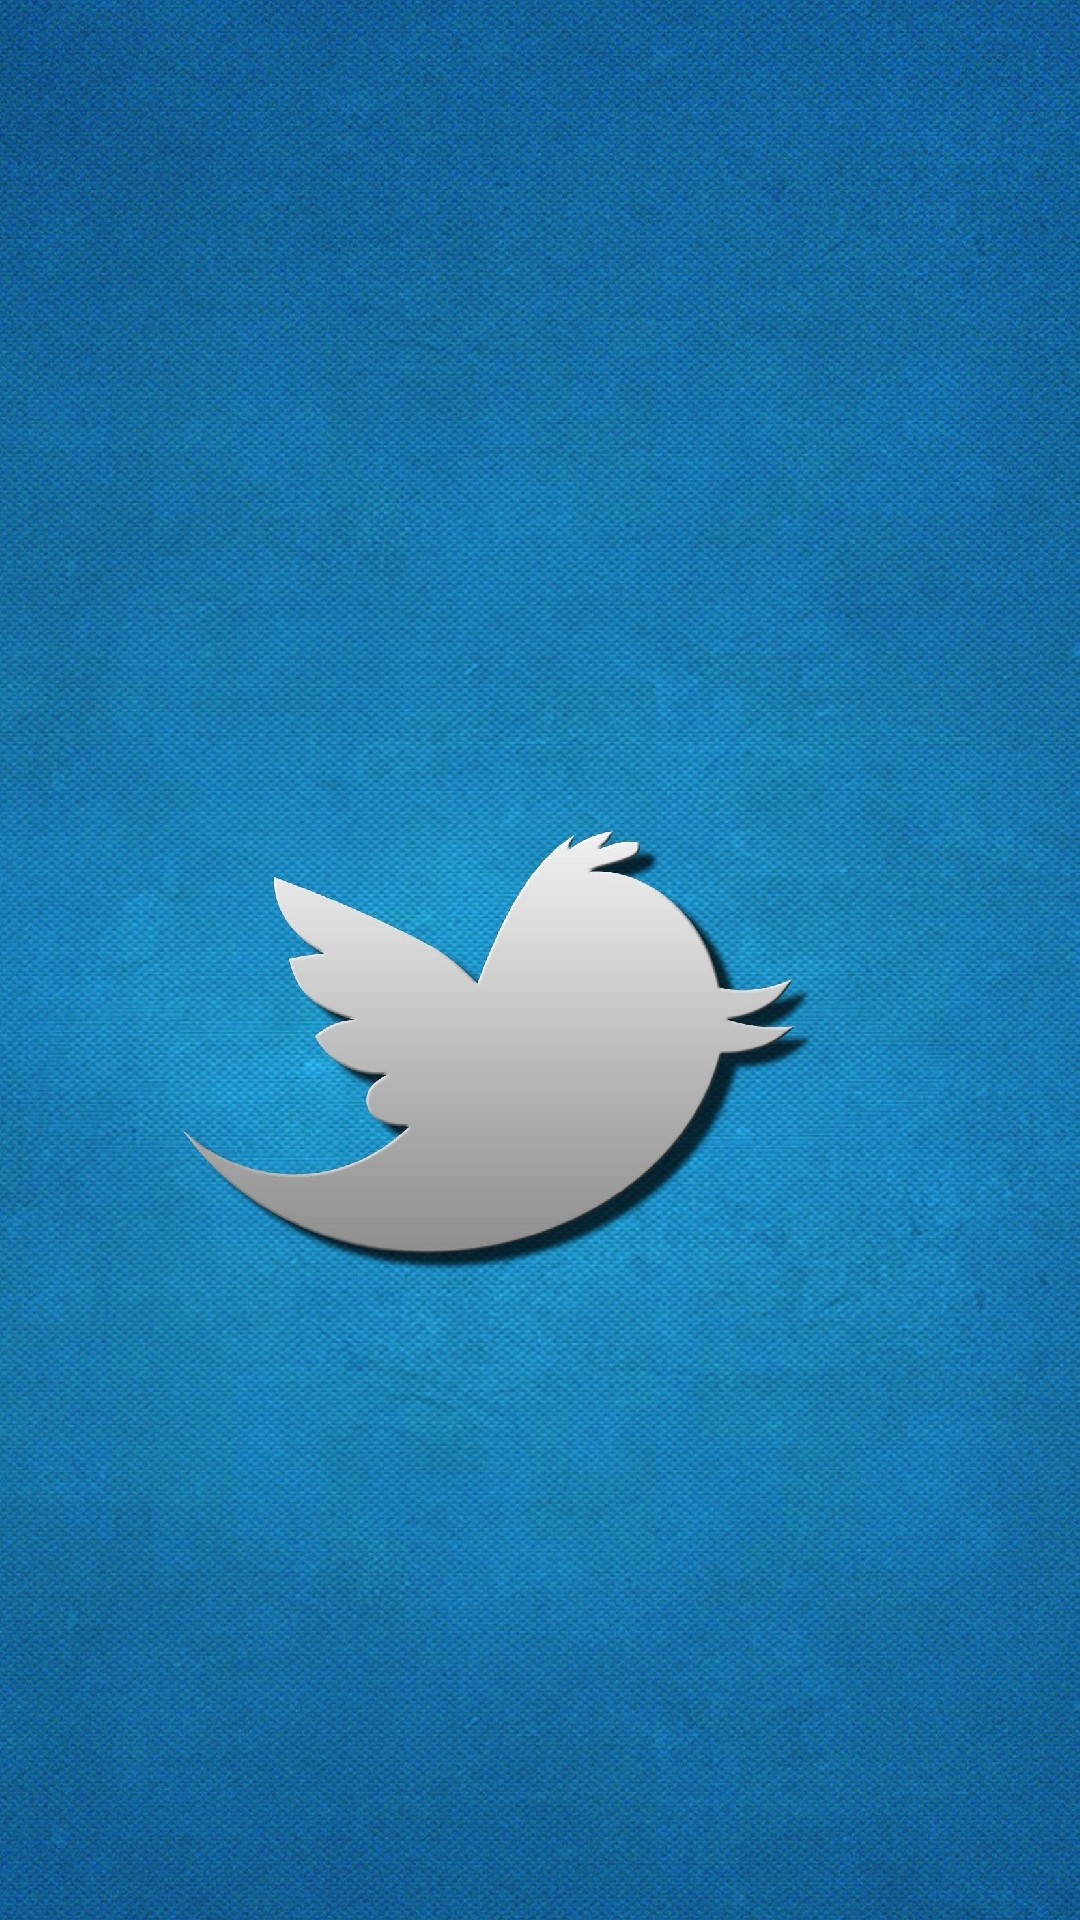 Twitter Logo Iphone Wallpapers